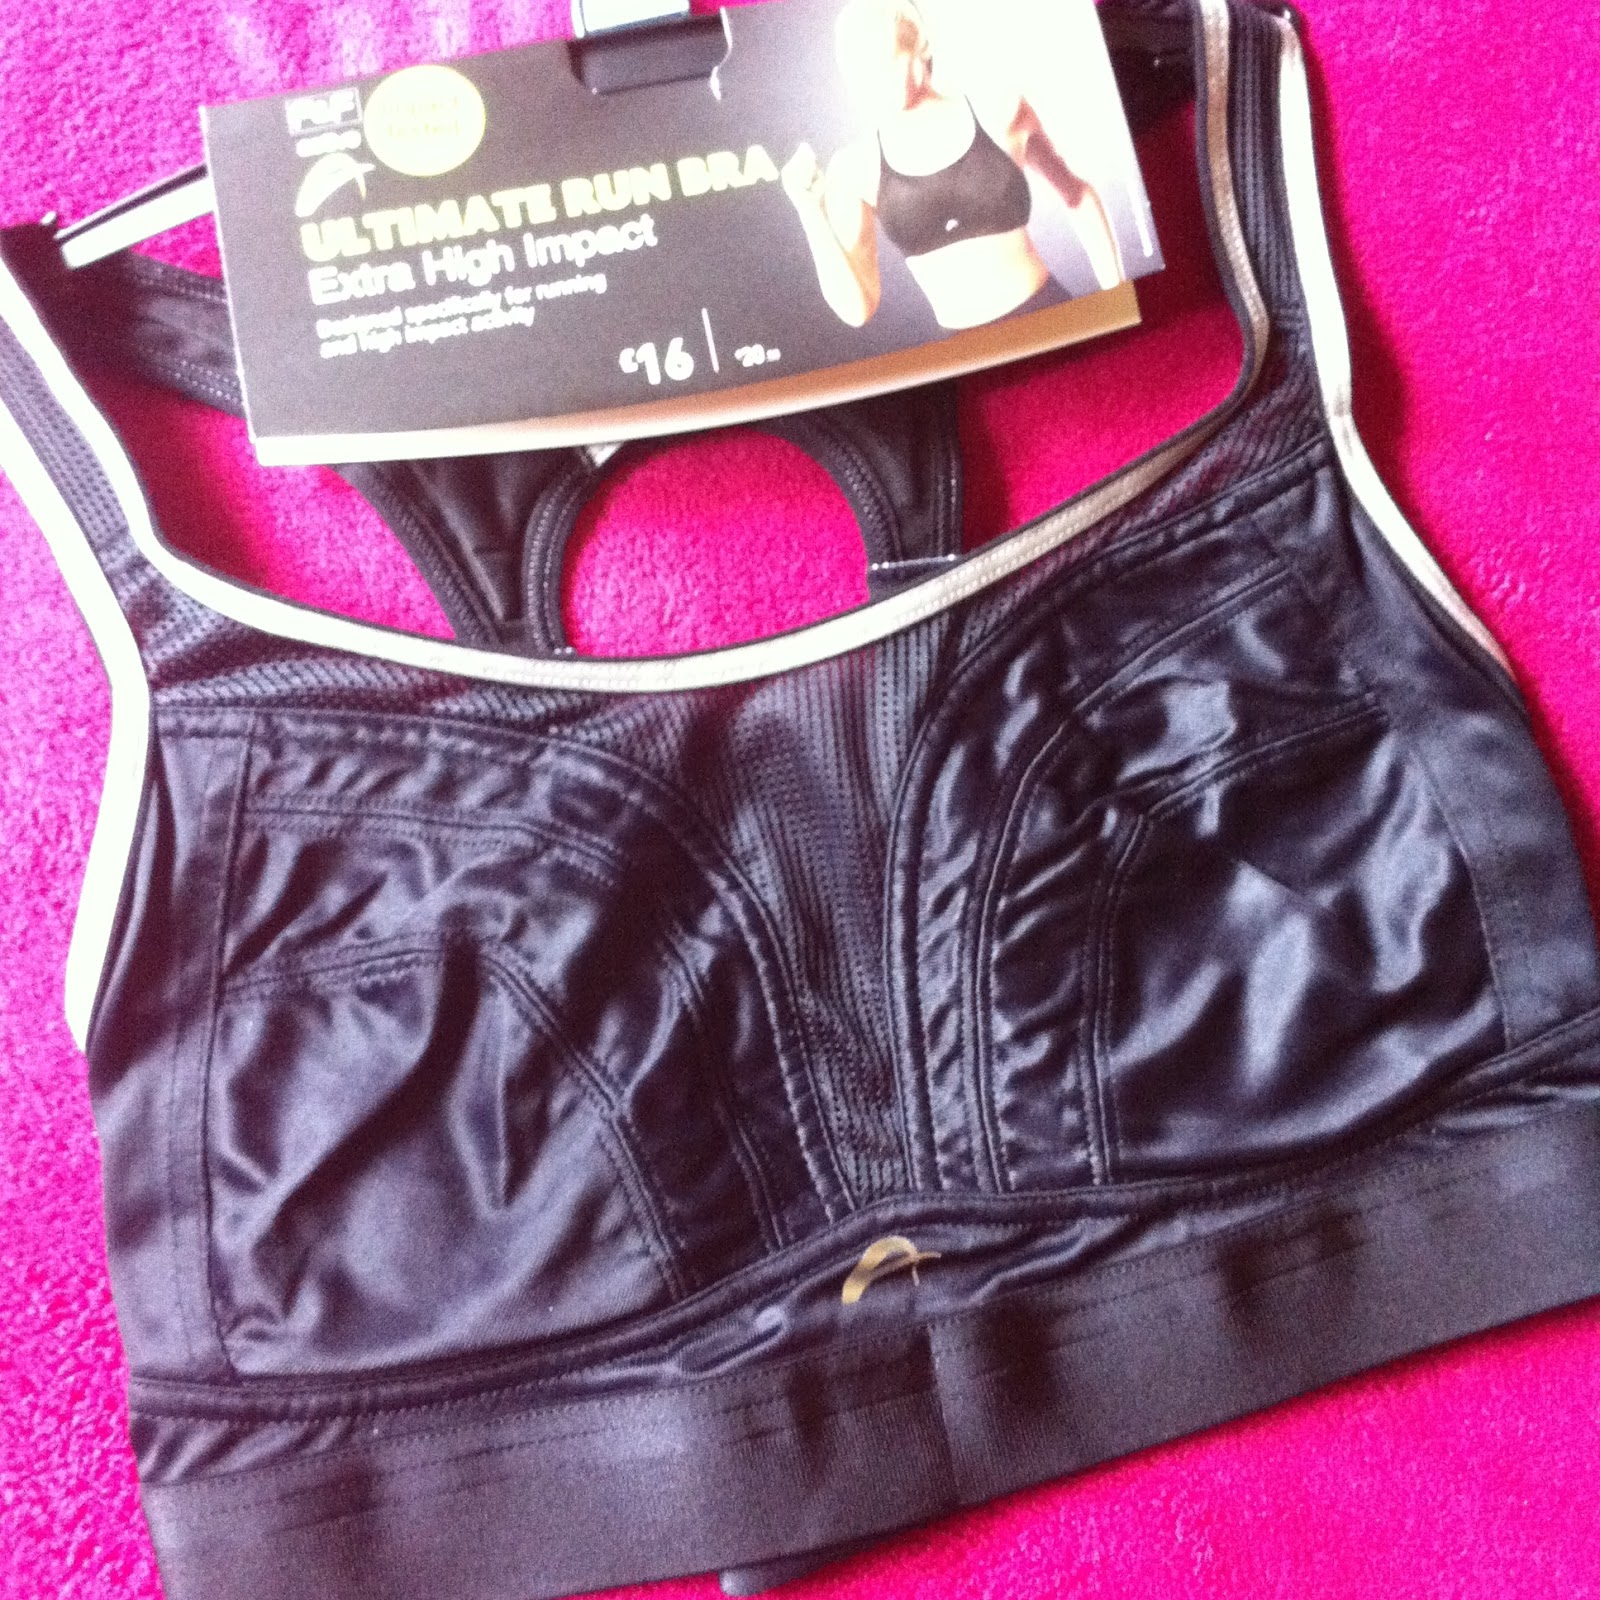 If You Can't Move It, Climb It: Kit Review : Tesco Sports Bra